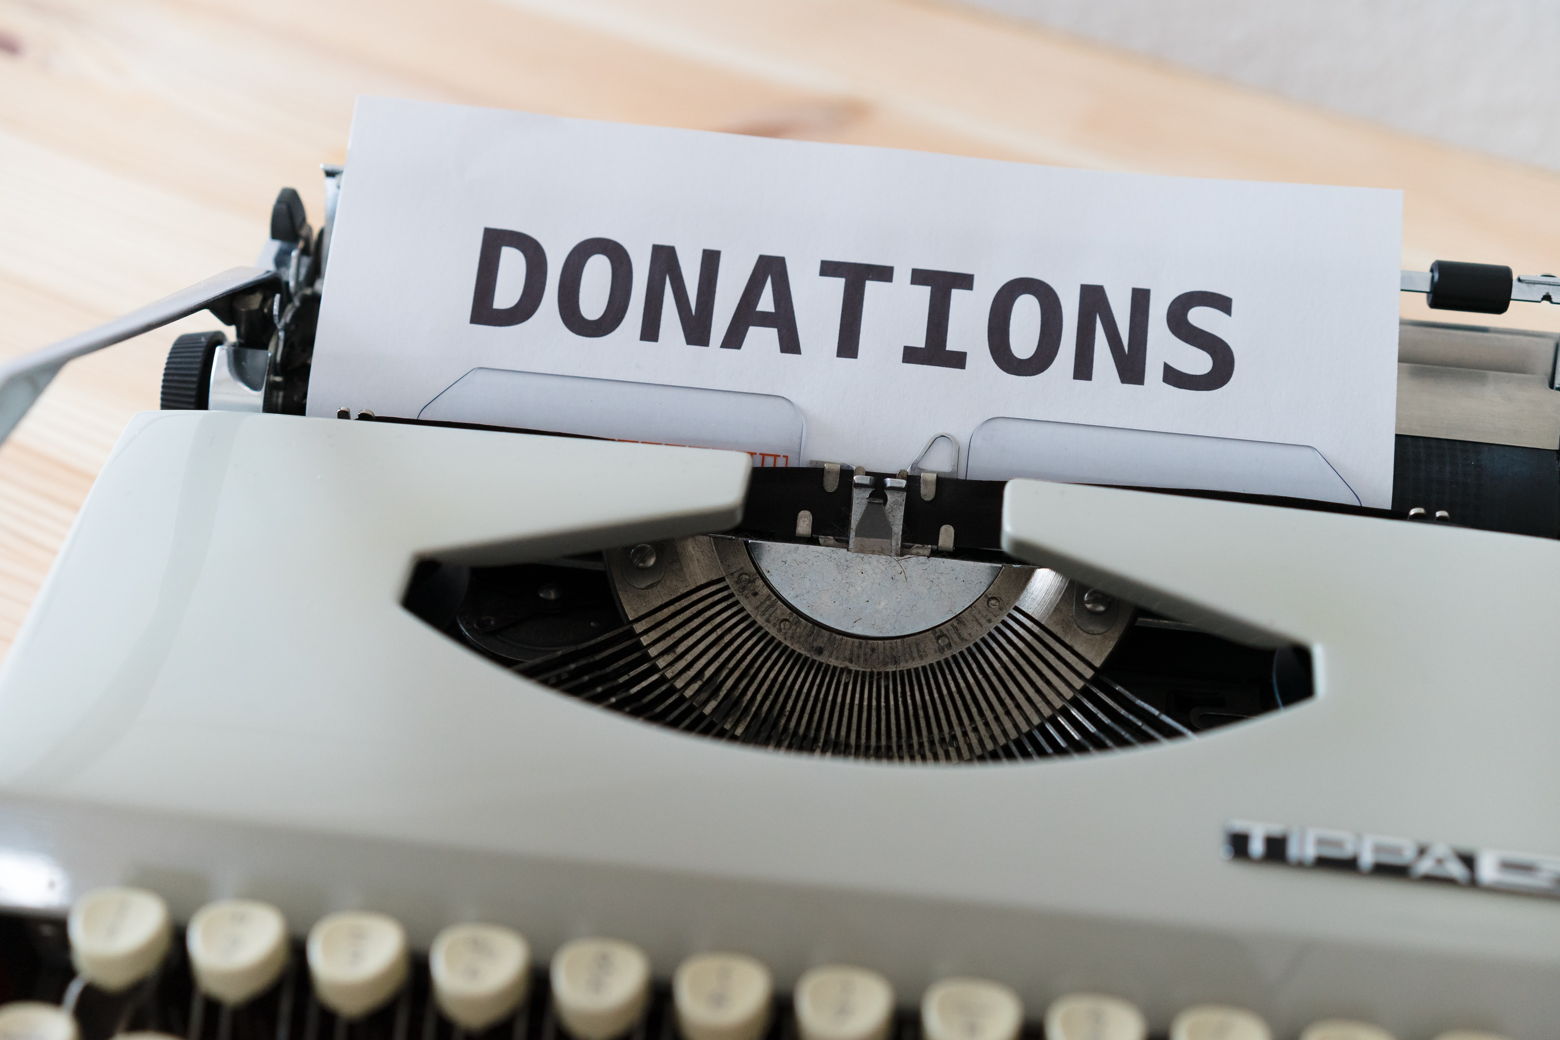 Donations in typewriter